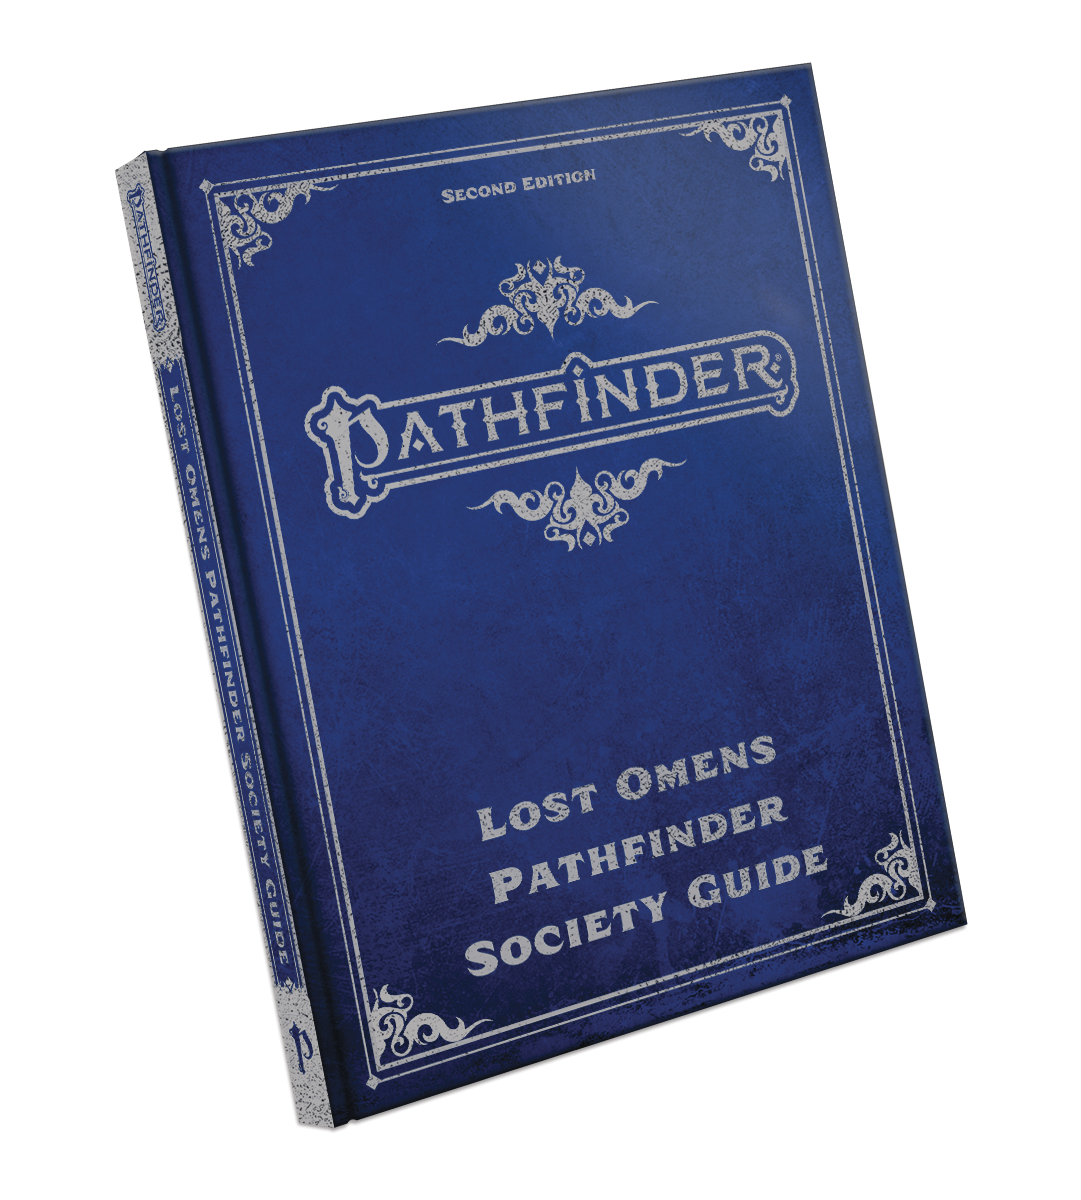 Pathfinder Lost Omens Society Guide Special Edition Hardcover (P2)